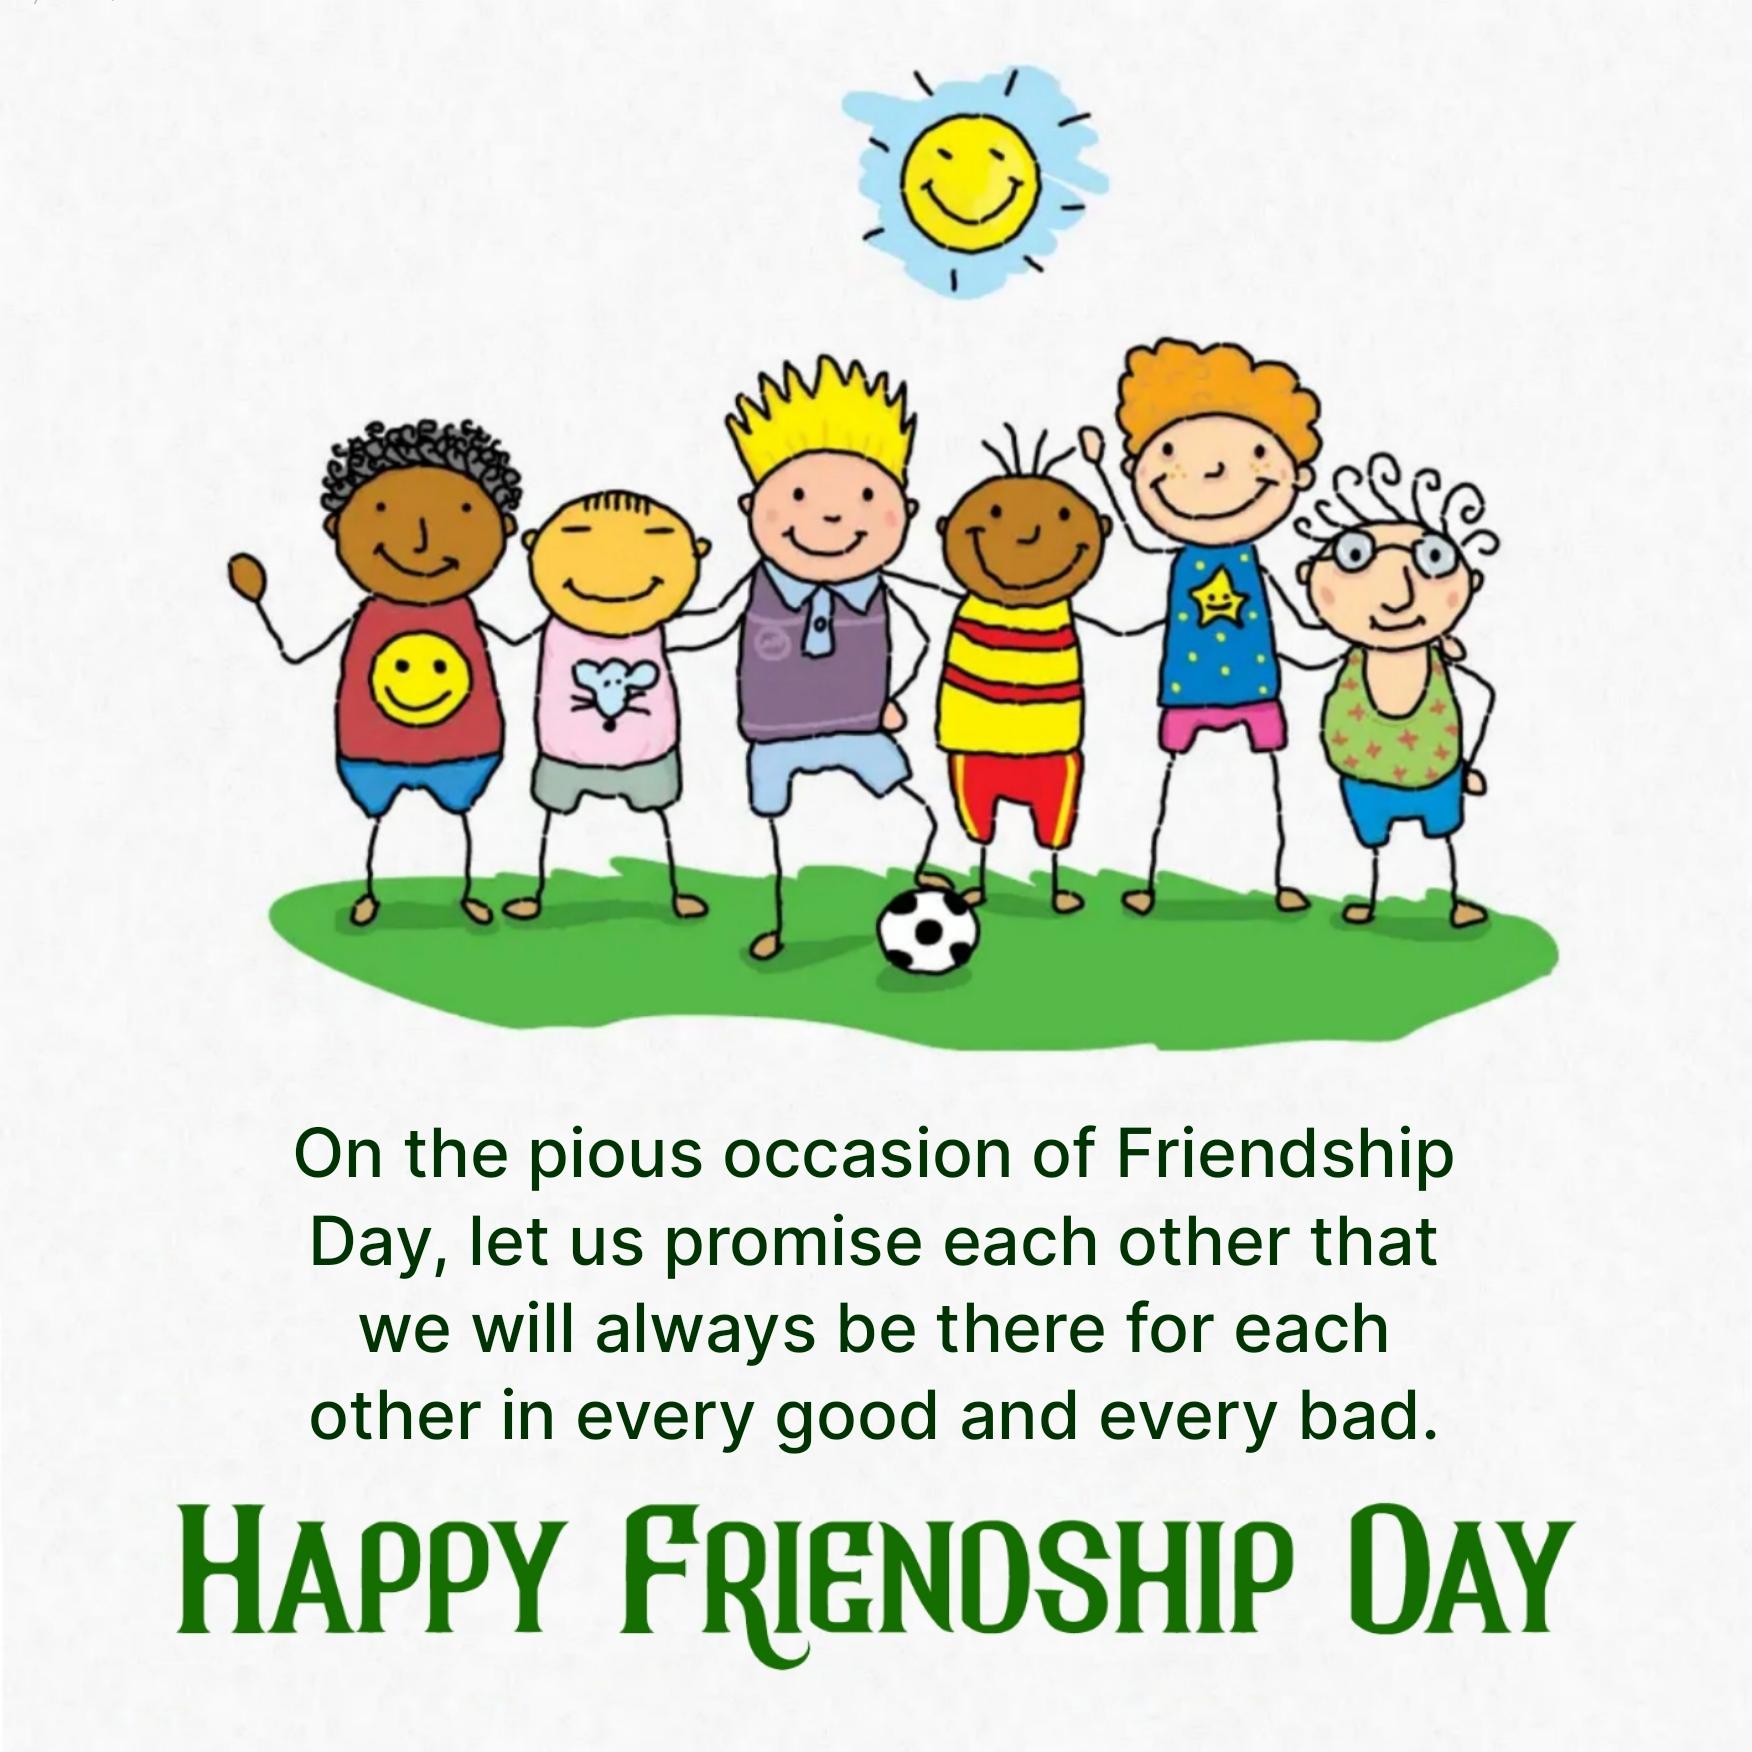 On the pious occasion of Friendship Day let us promise each other